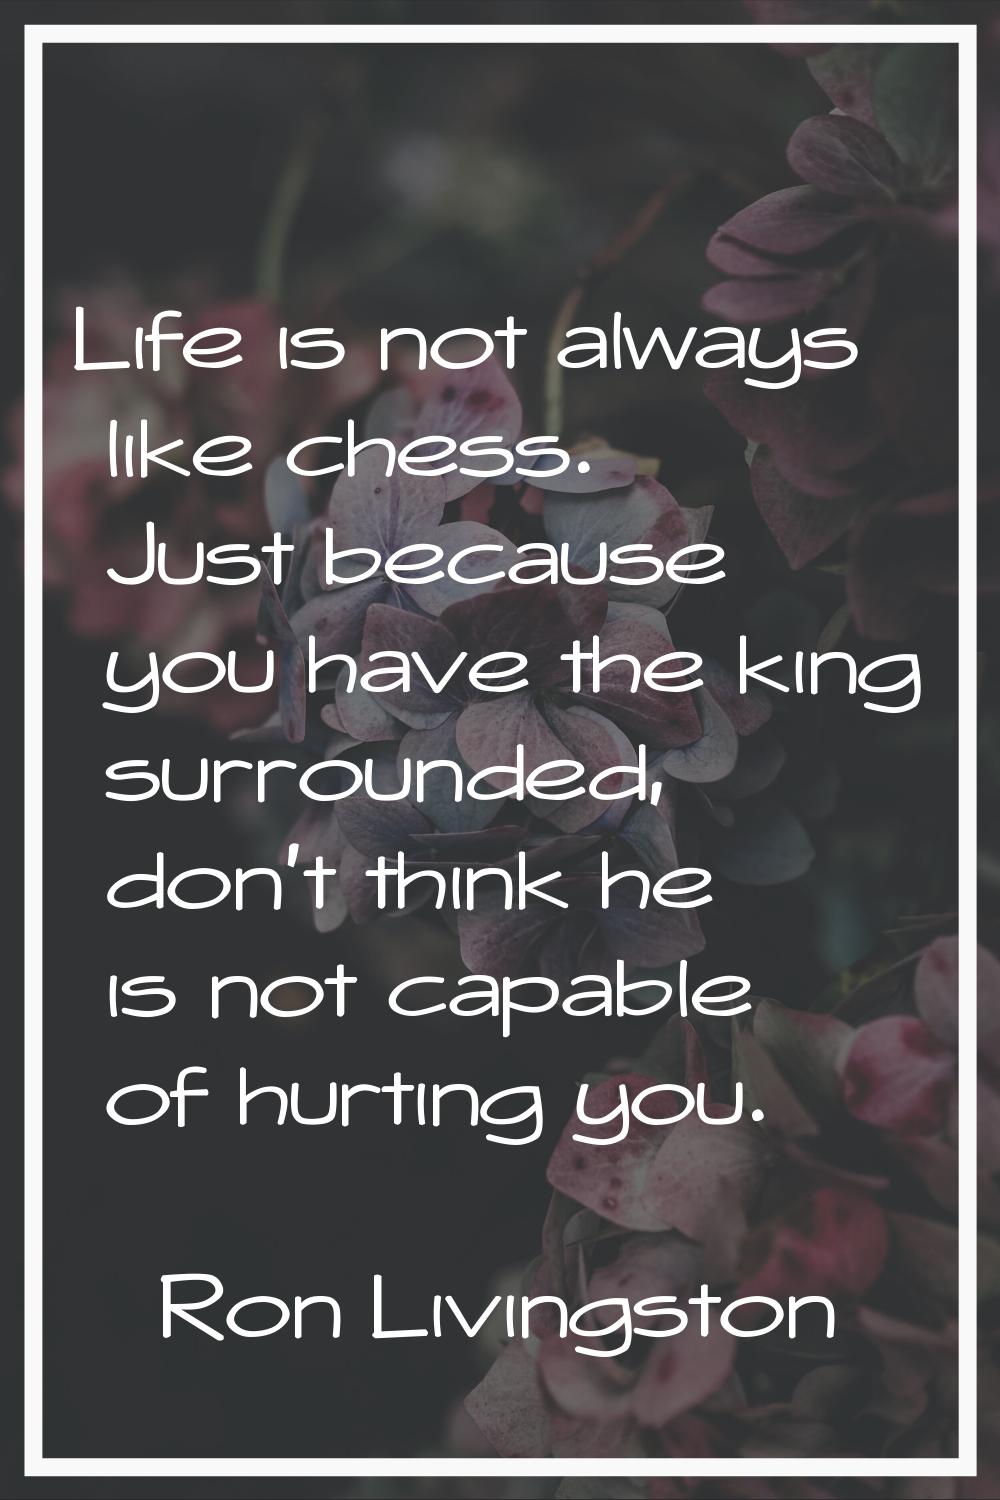 Life is not always like chess. Just because you have the king surrounded, don't think he is not cap